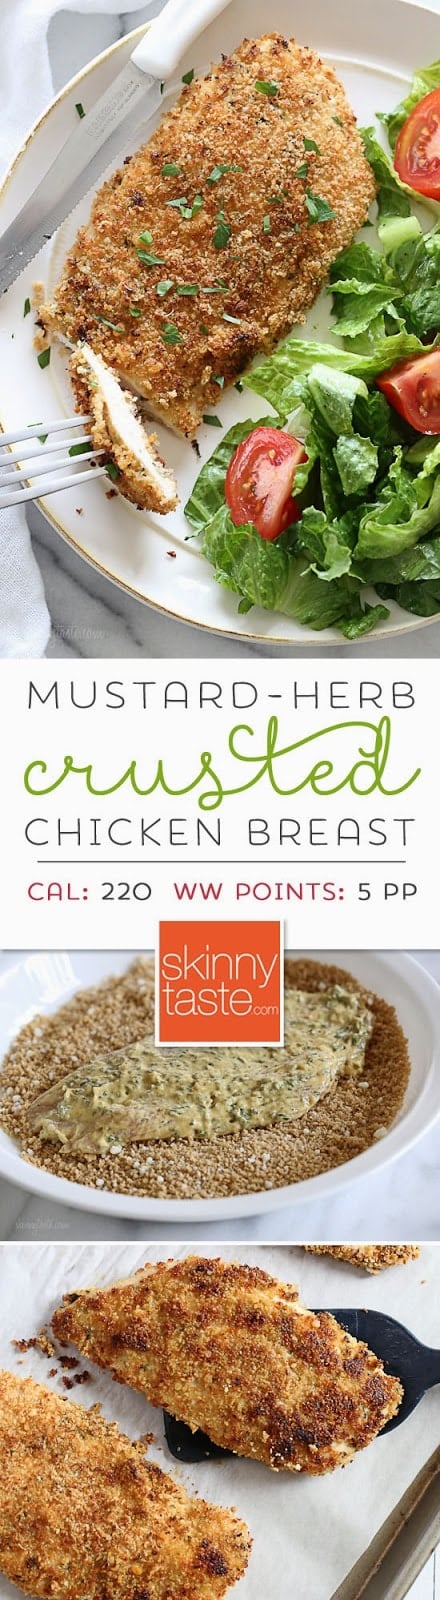 Mustard Herb Crusted Chicken Breasts – easy, light and delicious!